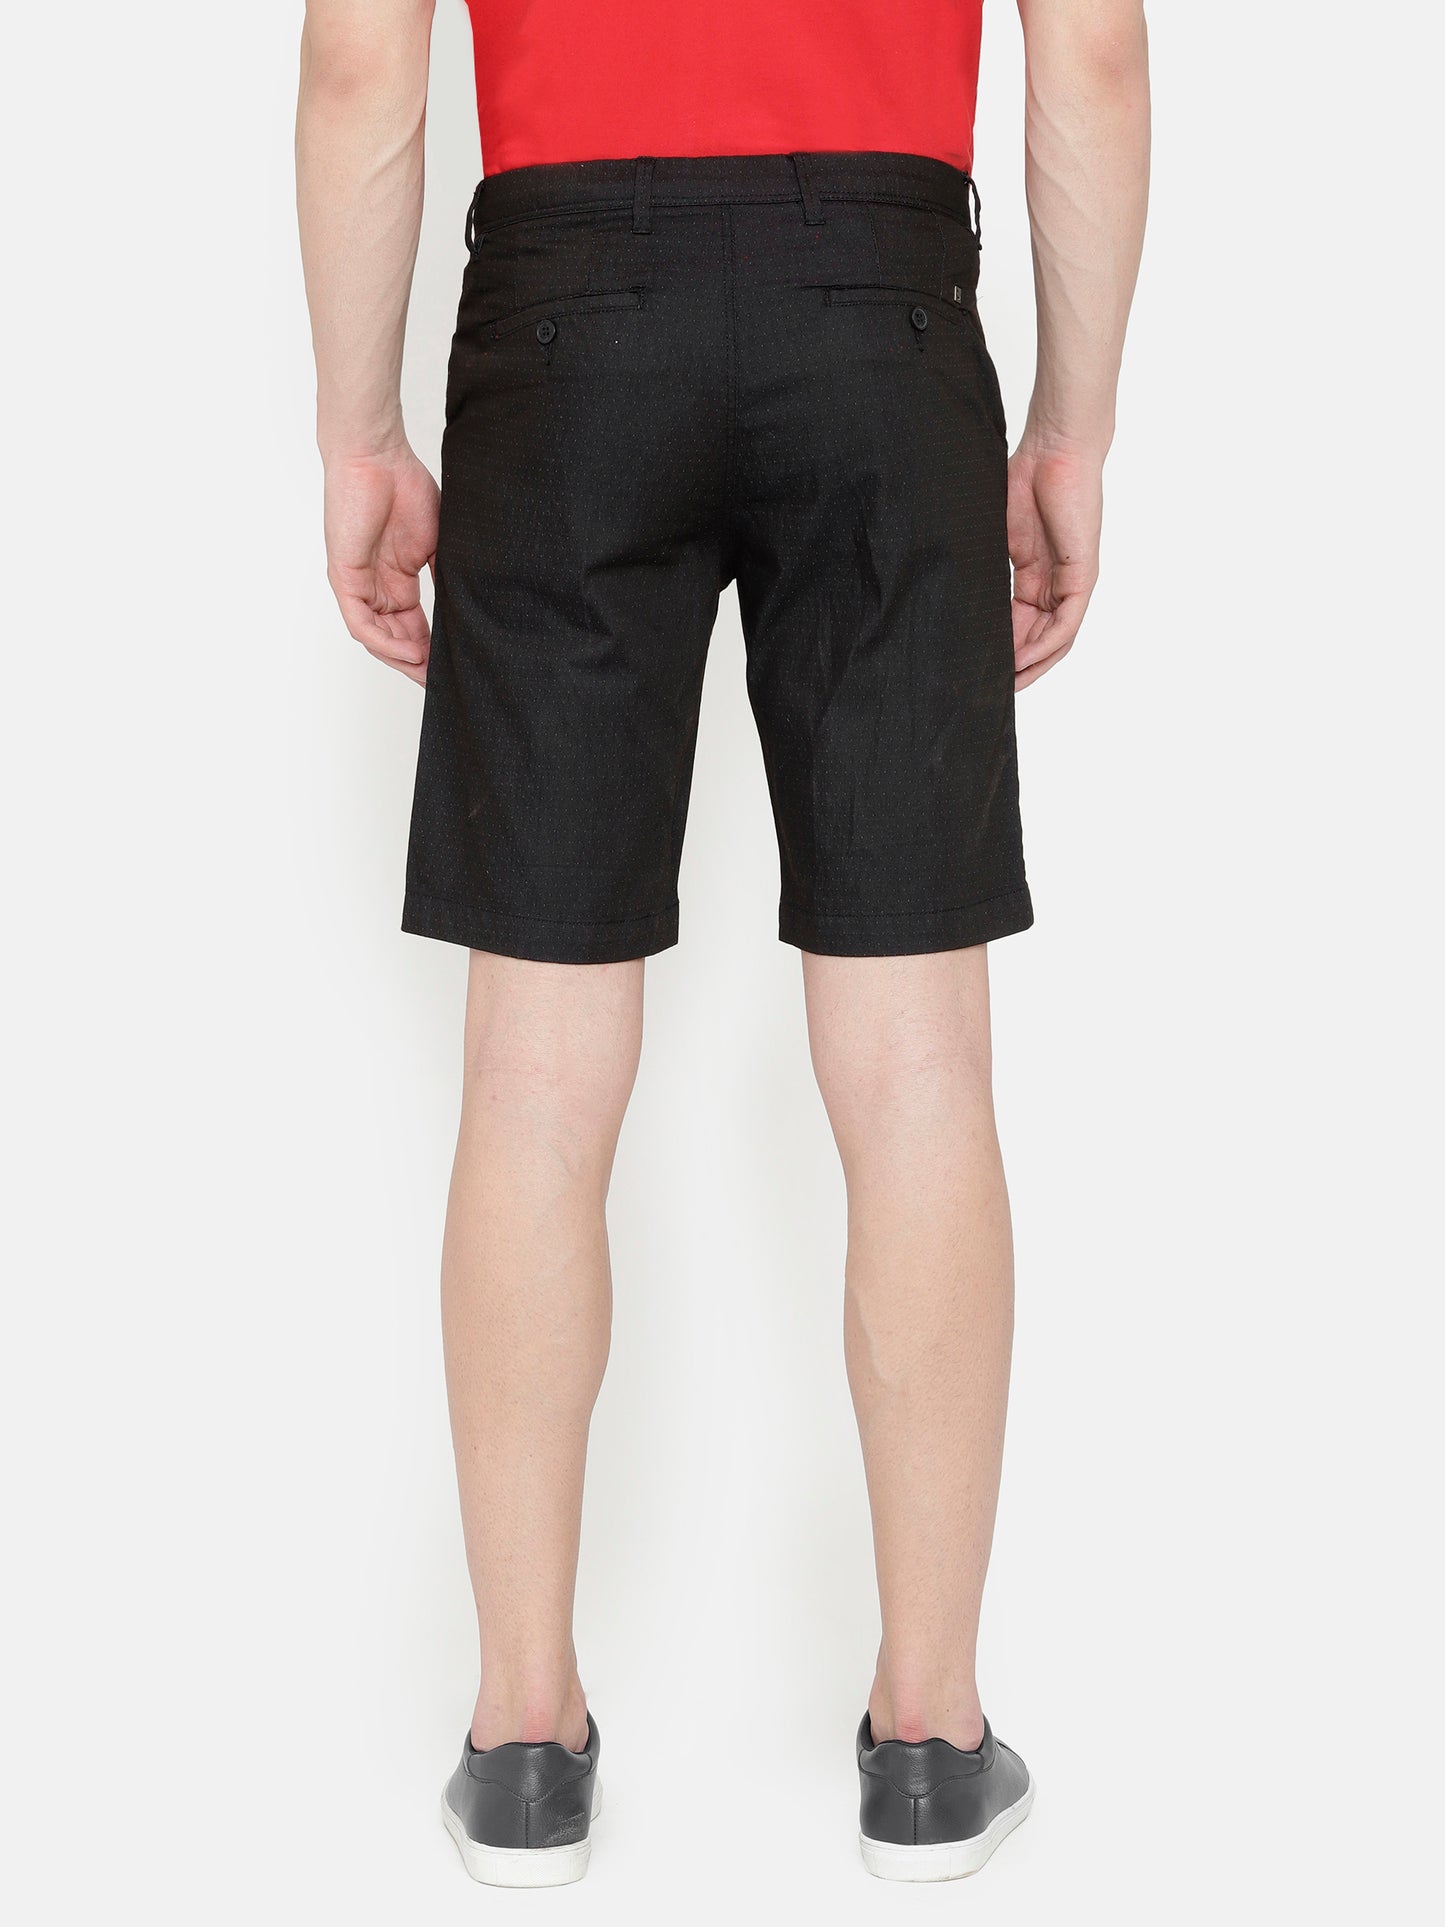 Casual Shorts in black color